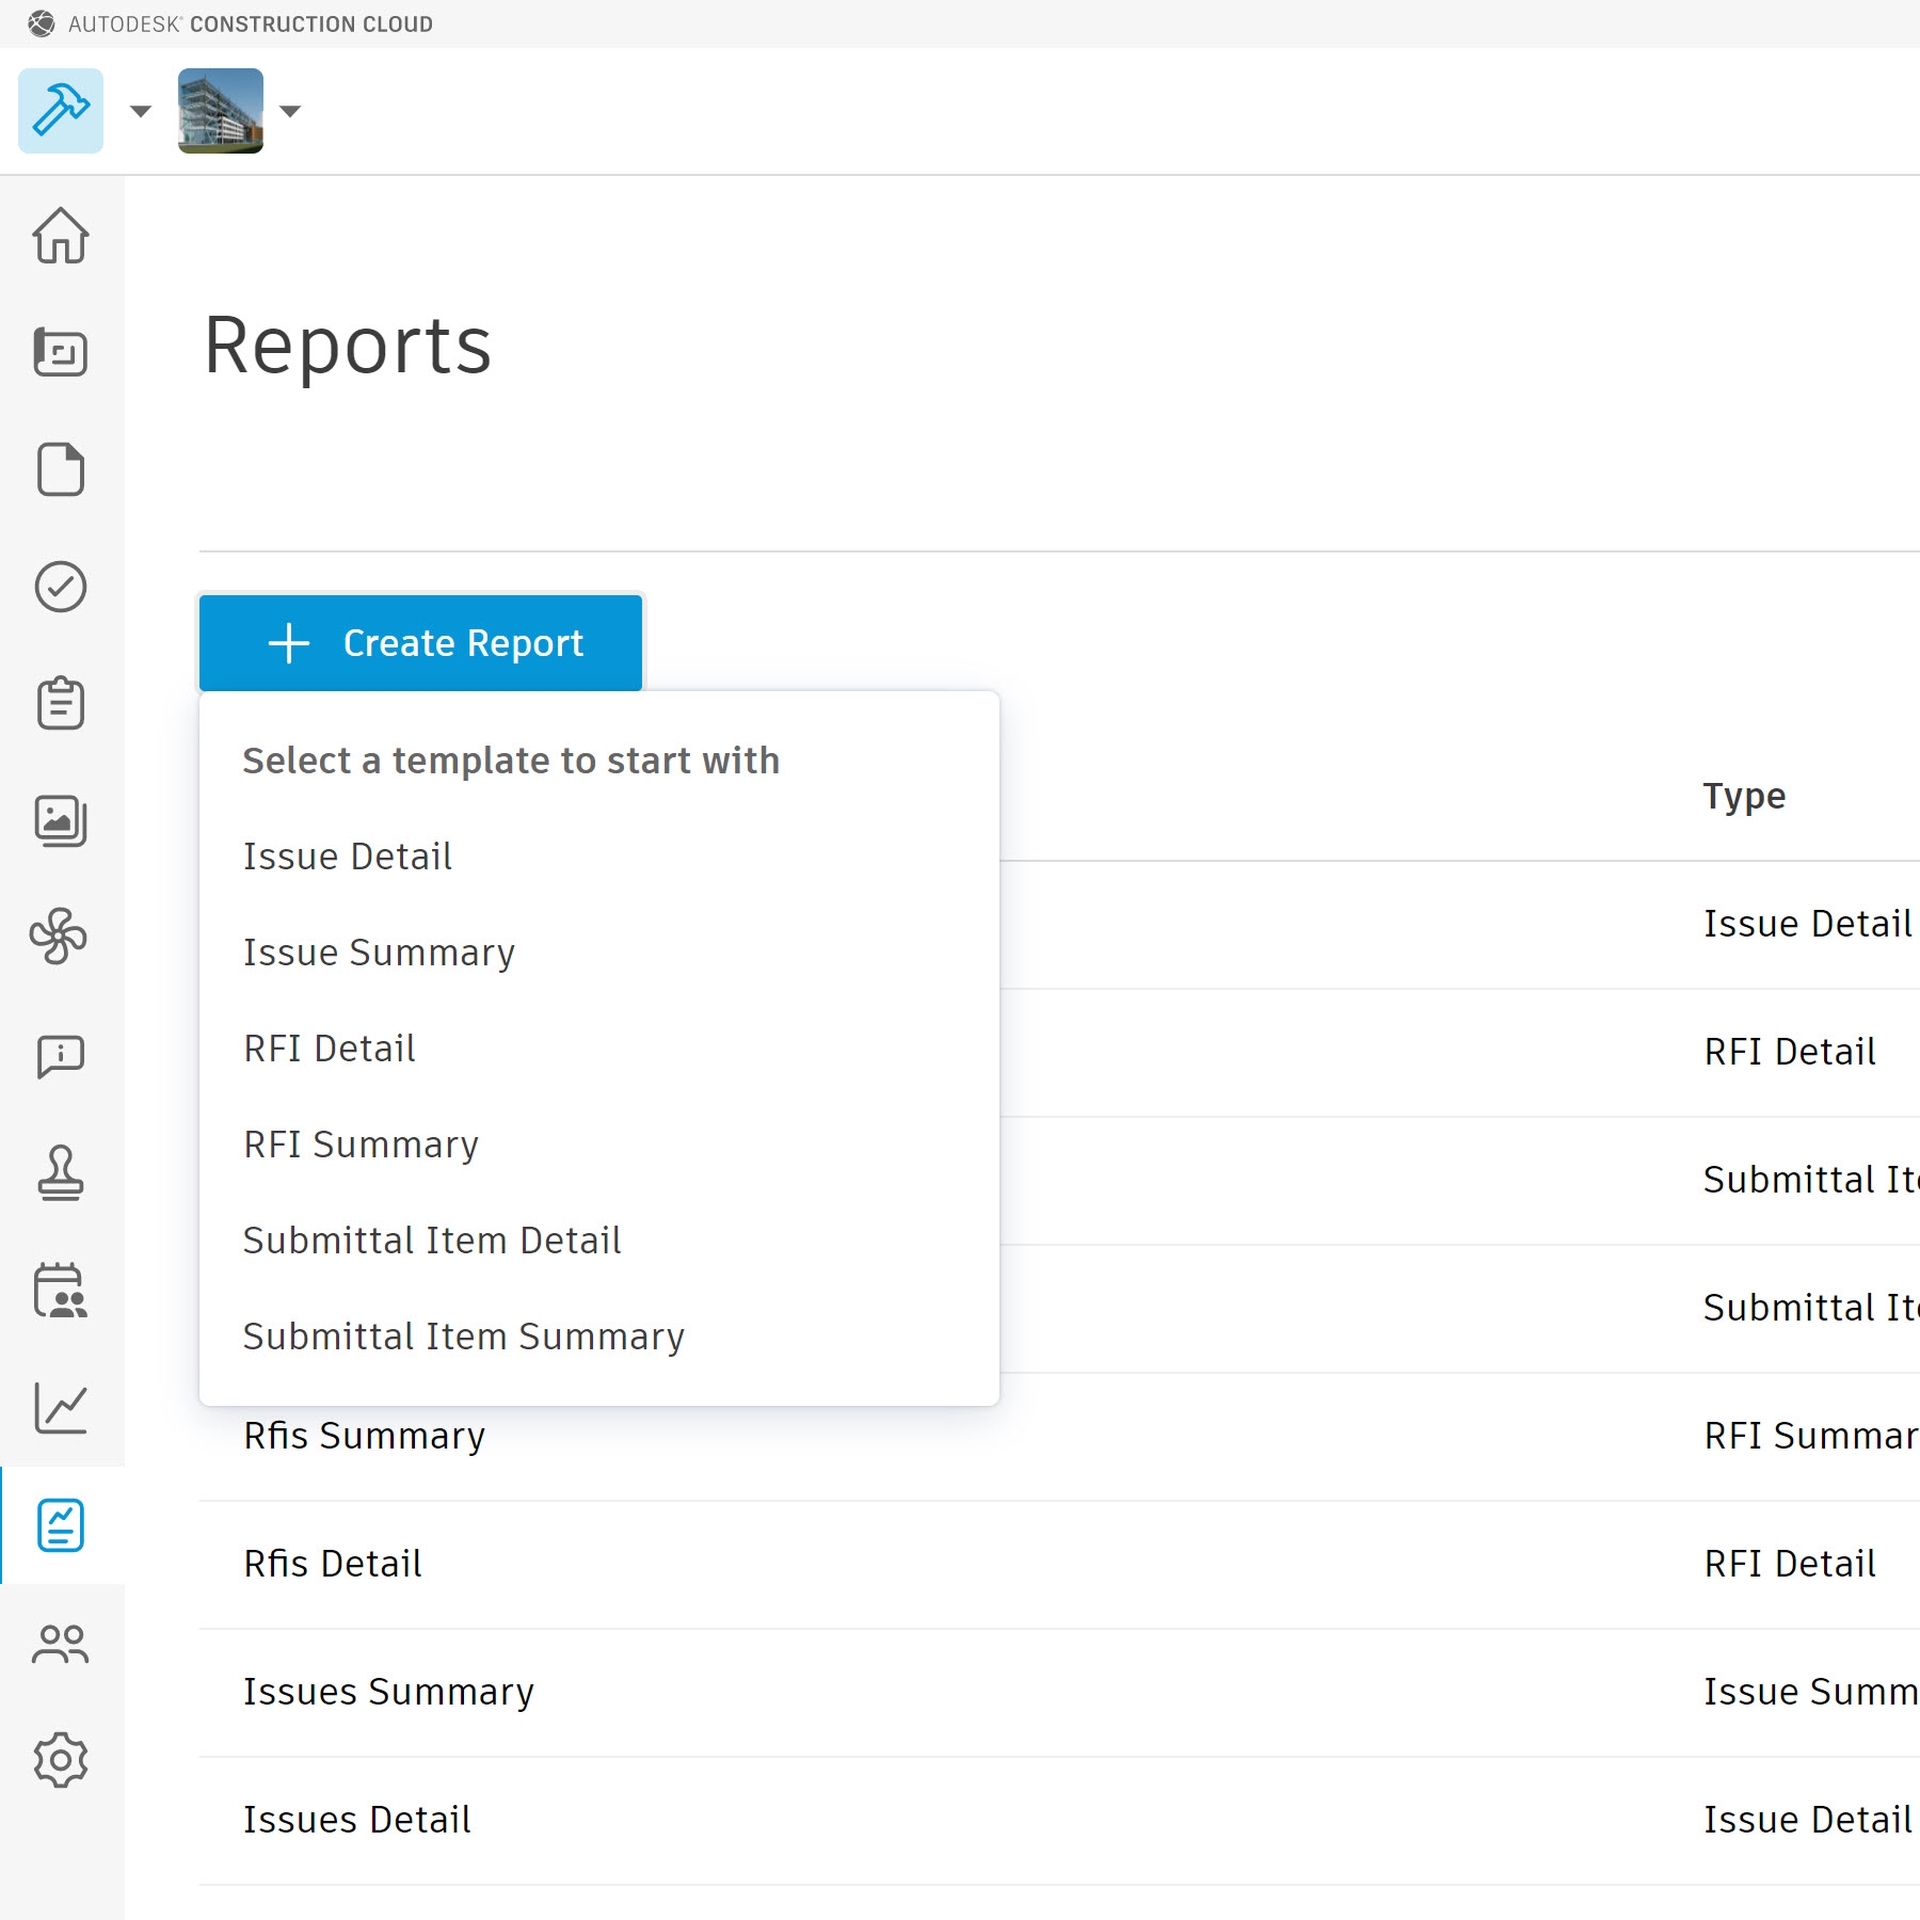 Daily Report Software for Construction with configurable reports.